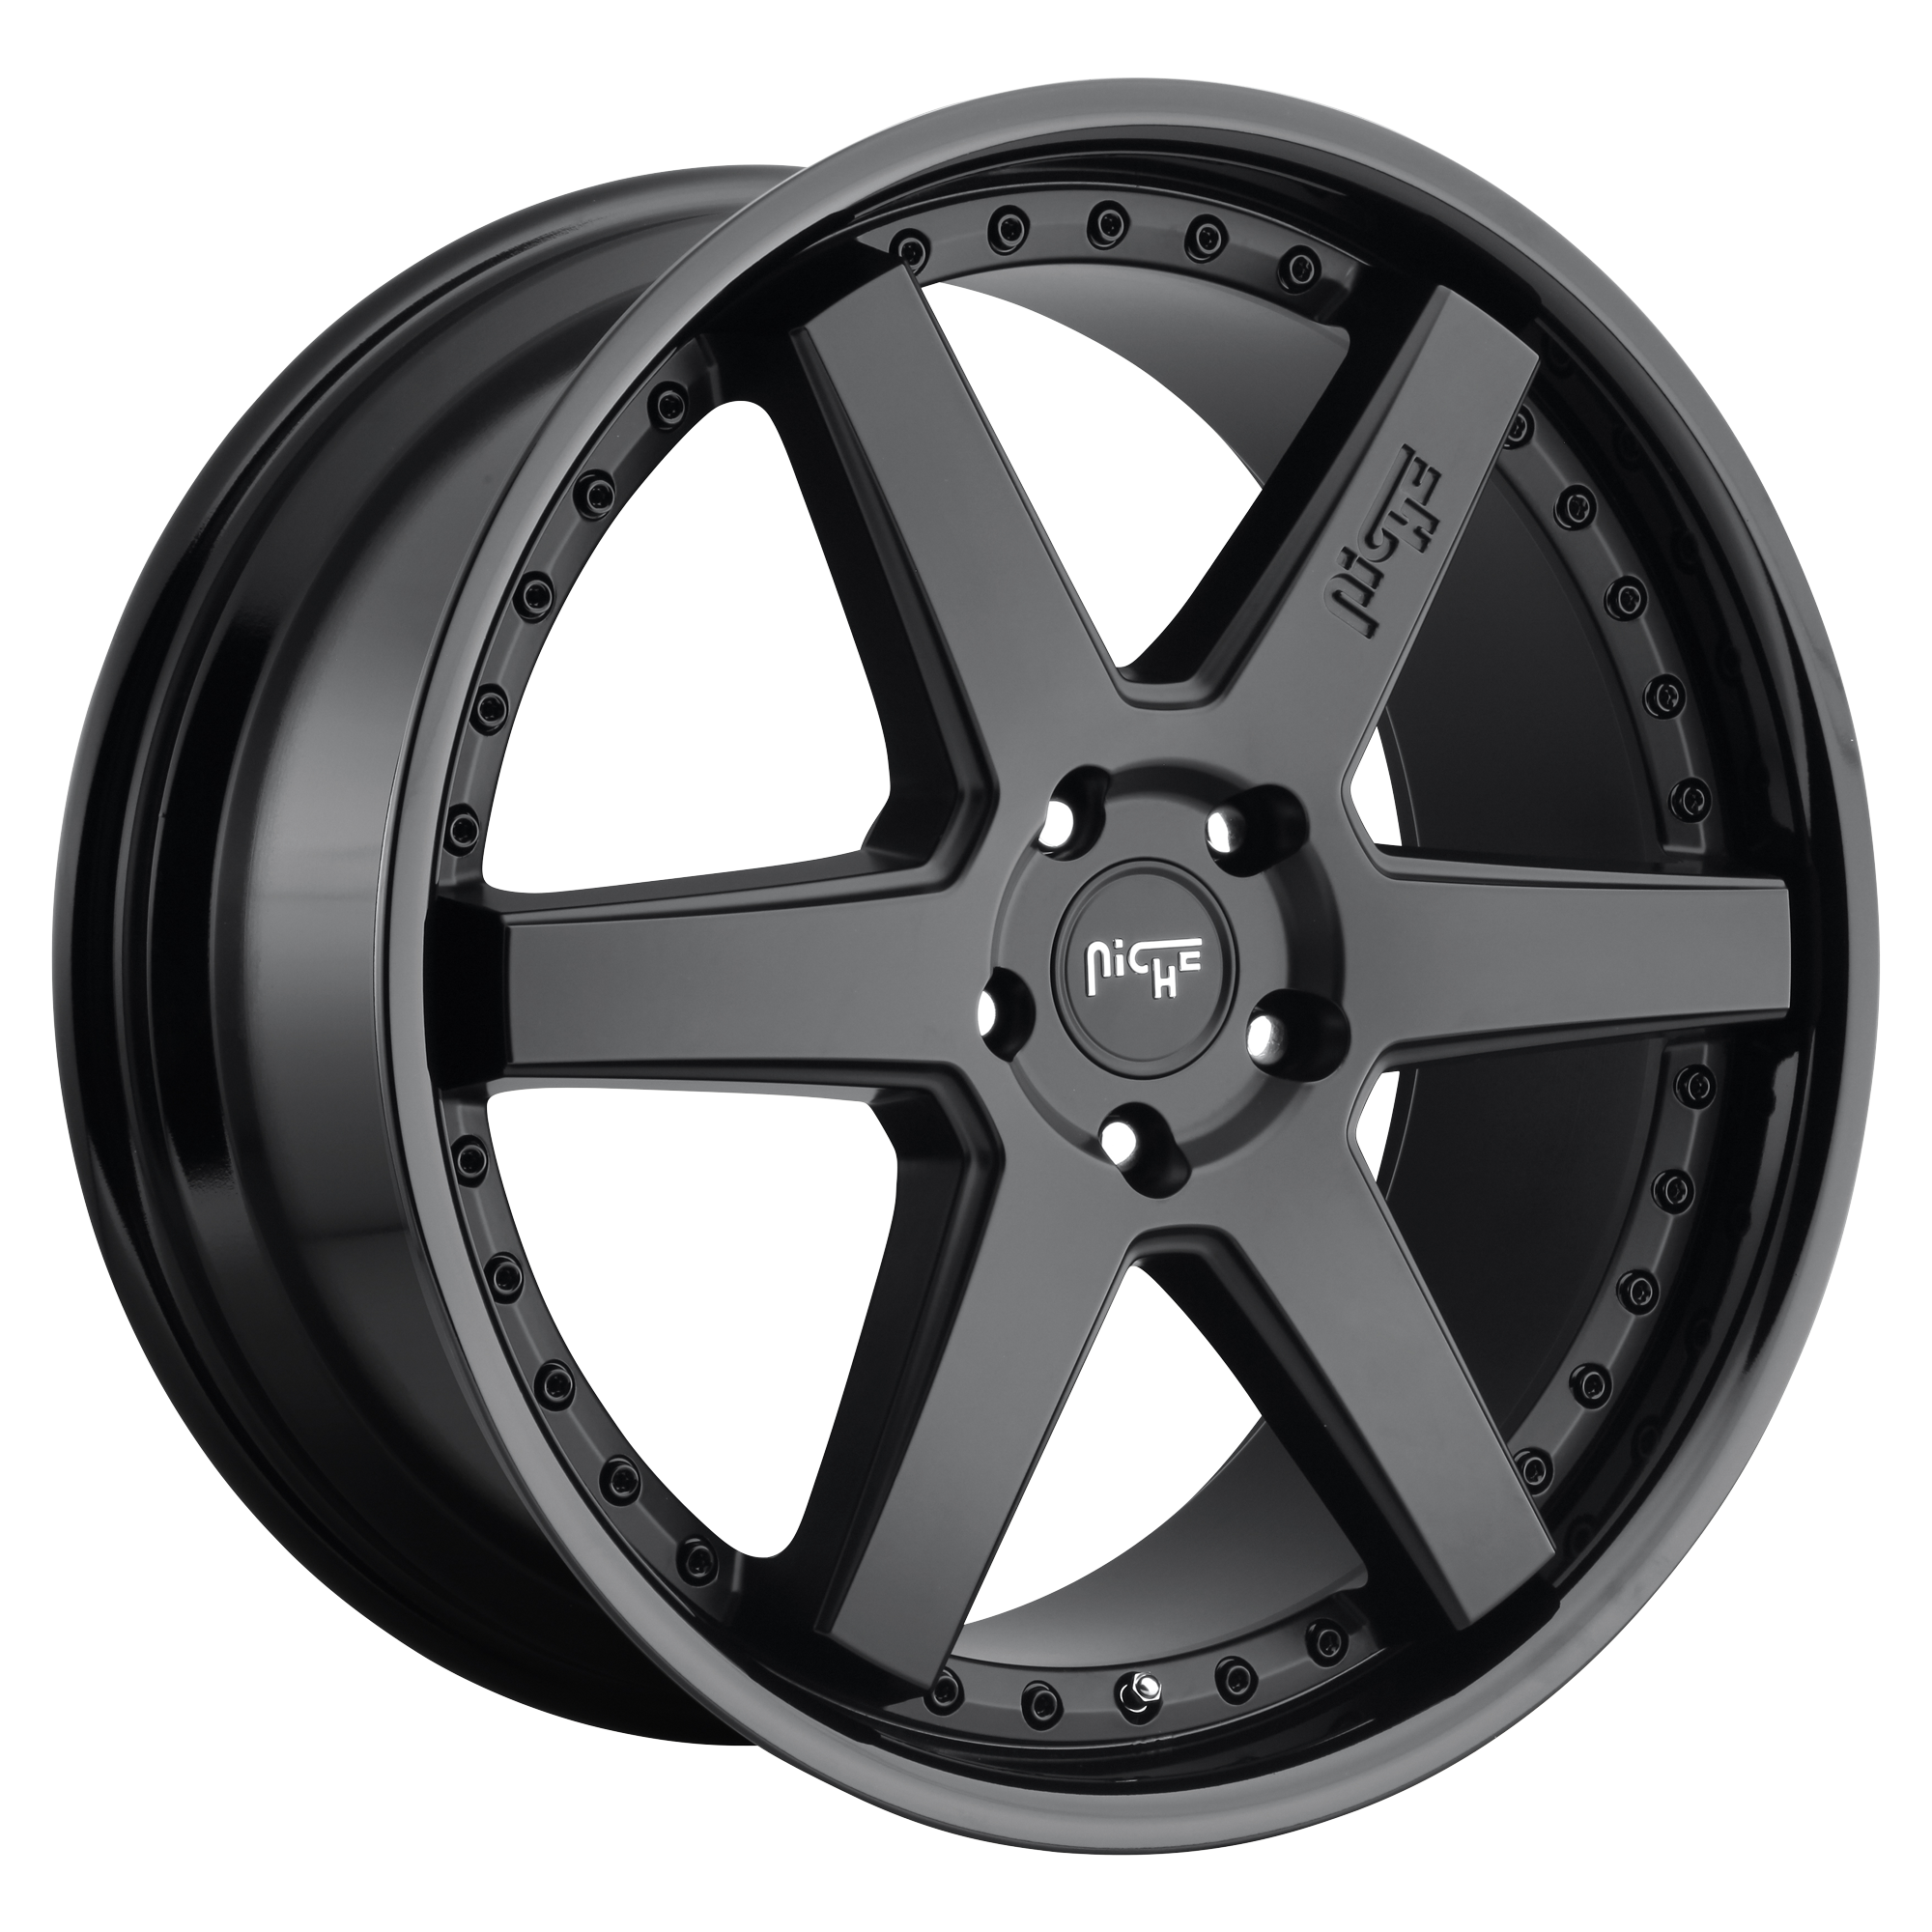 ALTAIR 20x10.5 5x112.00 GLOSS BLACK MATTE BLACK (30 mm) - Tires and Engine Performance